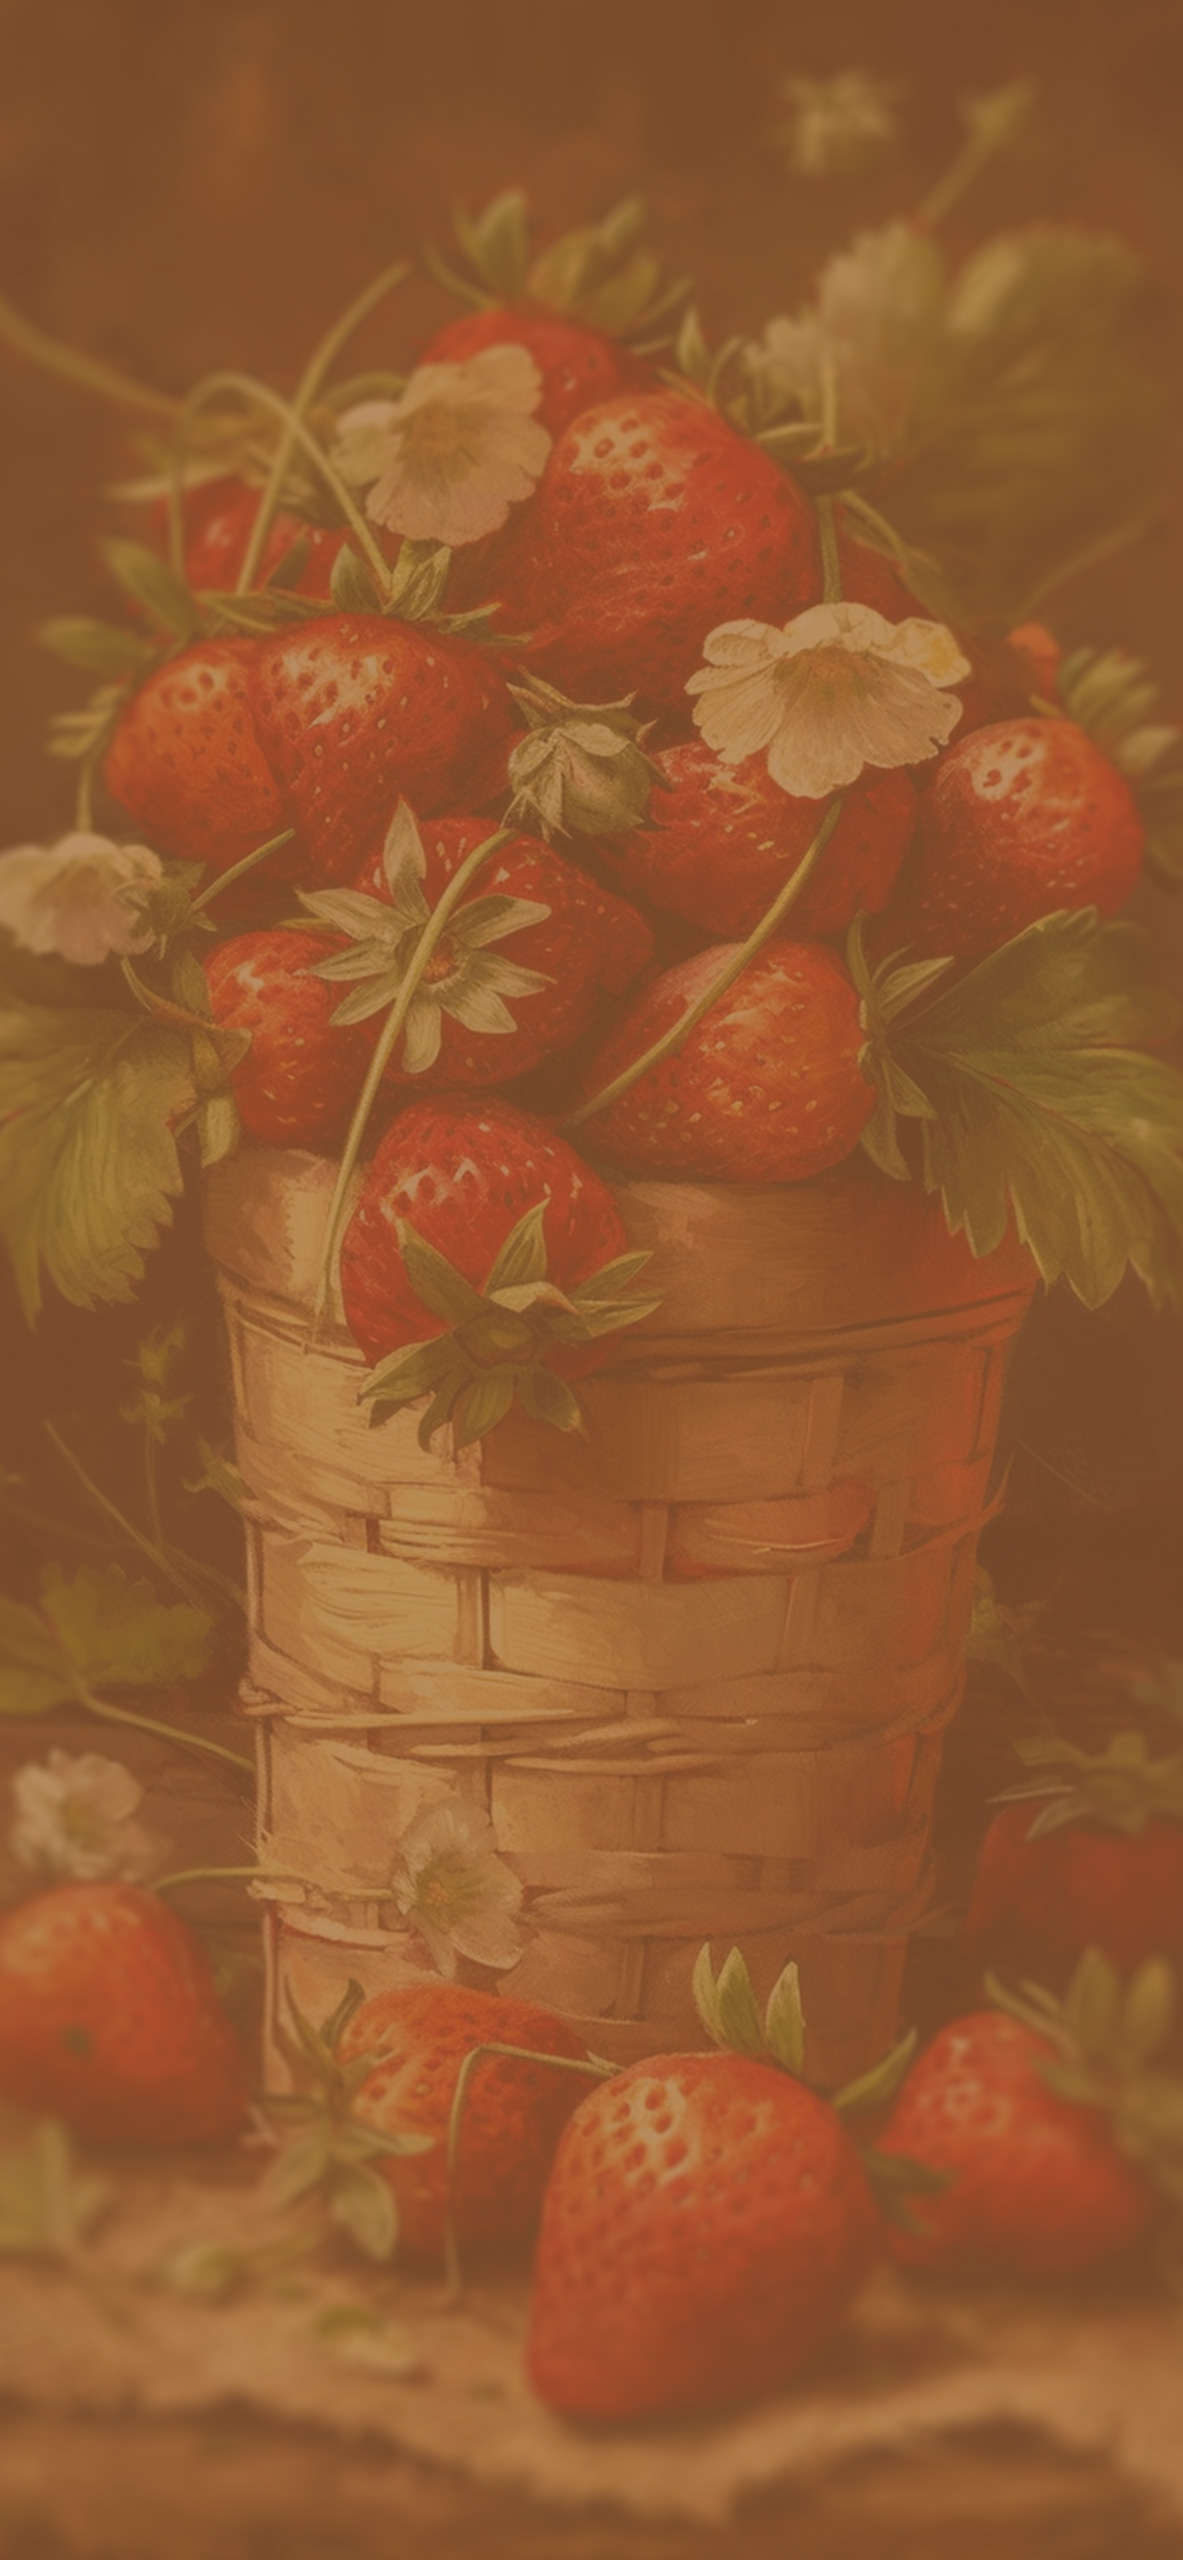 strawberries in the basket art background